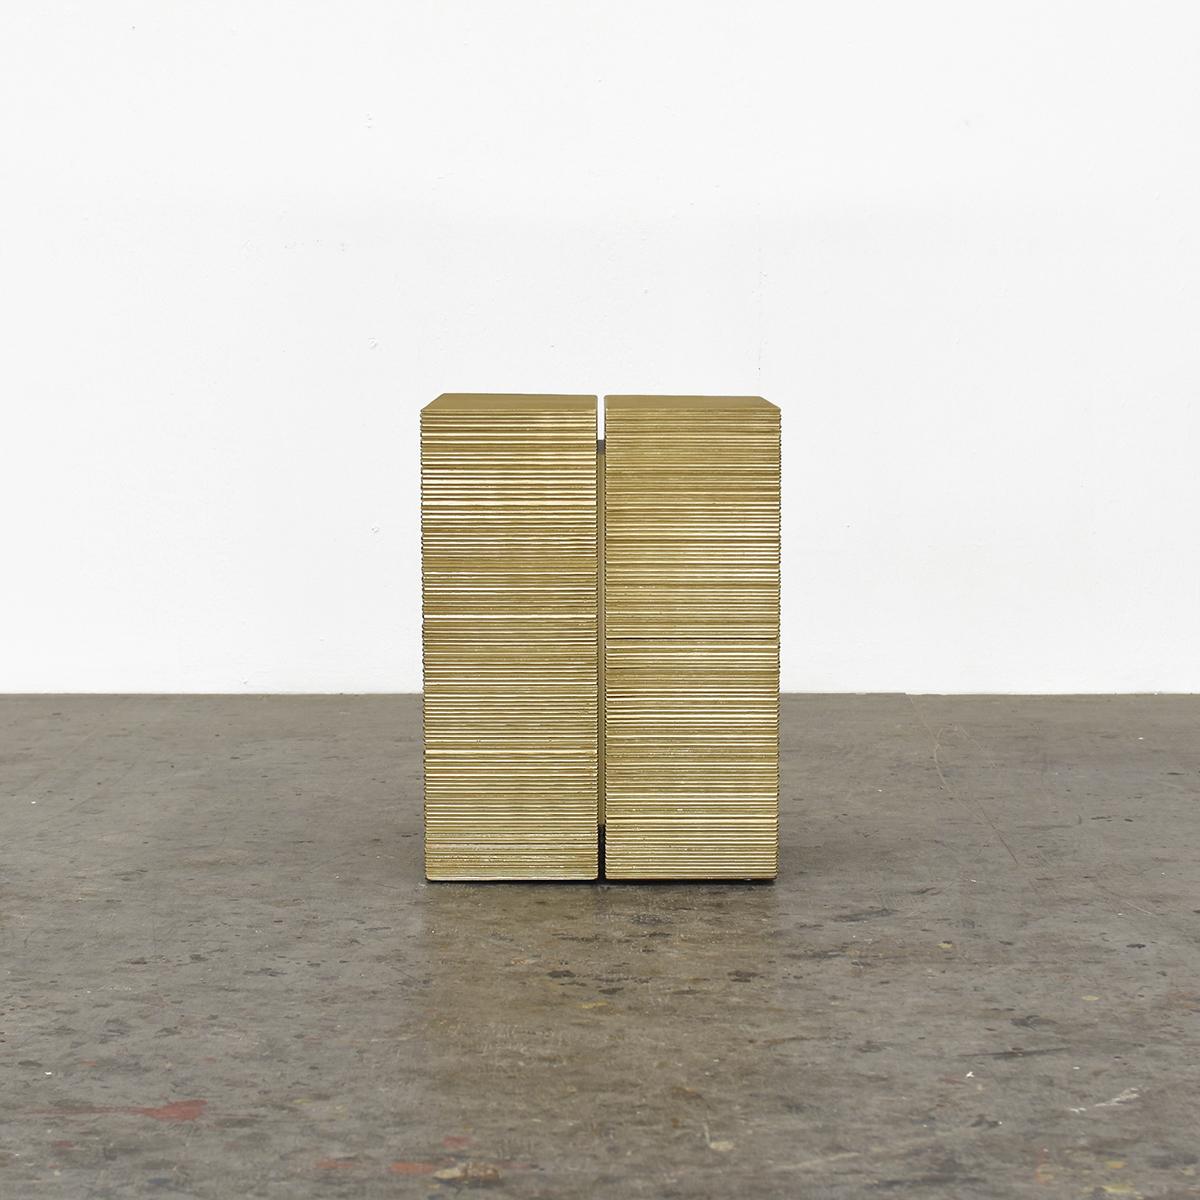 Oro, a new series by John Eric Byers, marks the artist’s 30th solo exhibition. An elegant balance of contrasts takes form in these visually stunning works. Blocks of wood are meticulously hand carved into a pattern that celebrates the beauty of